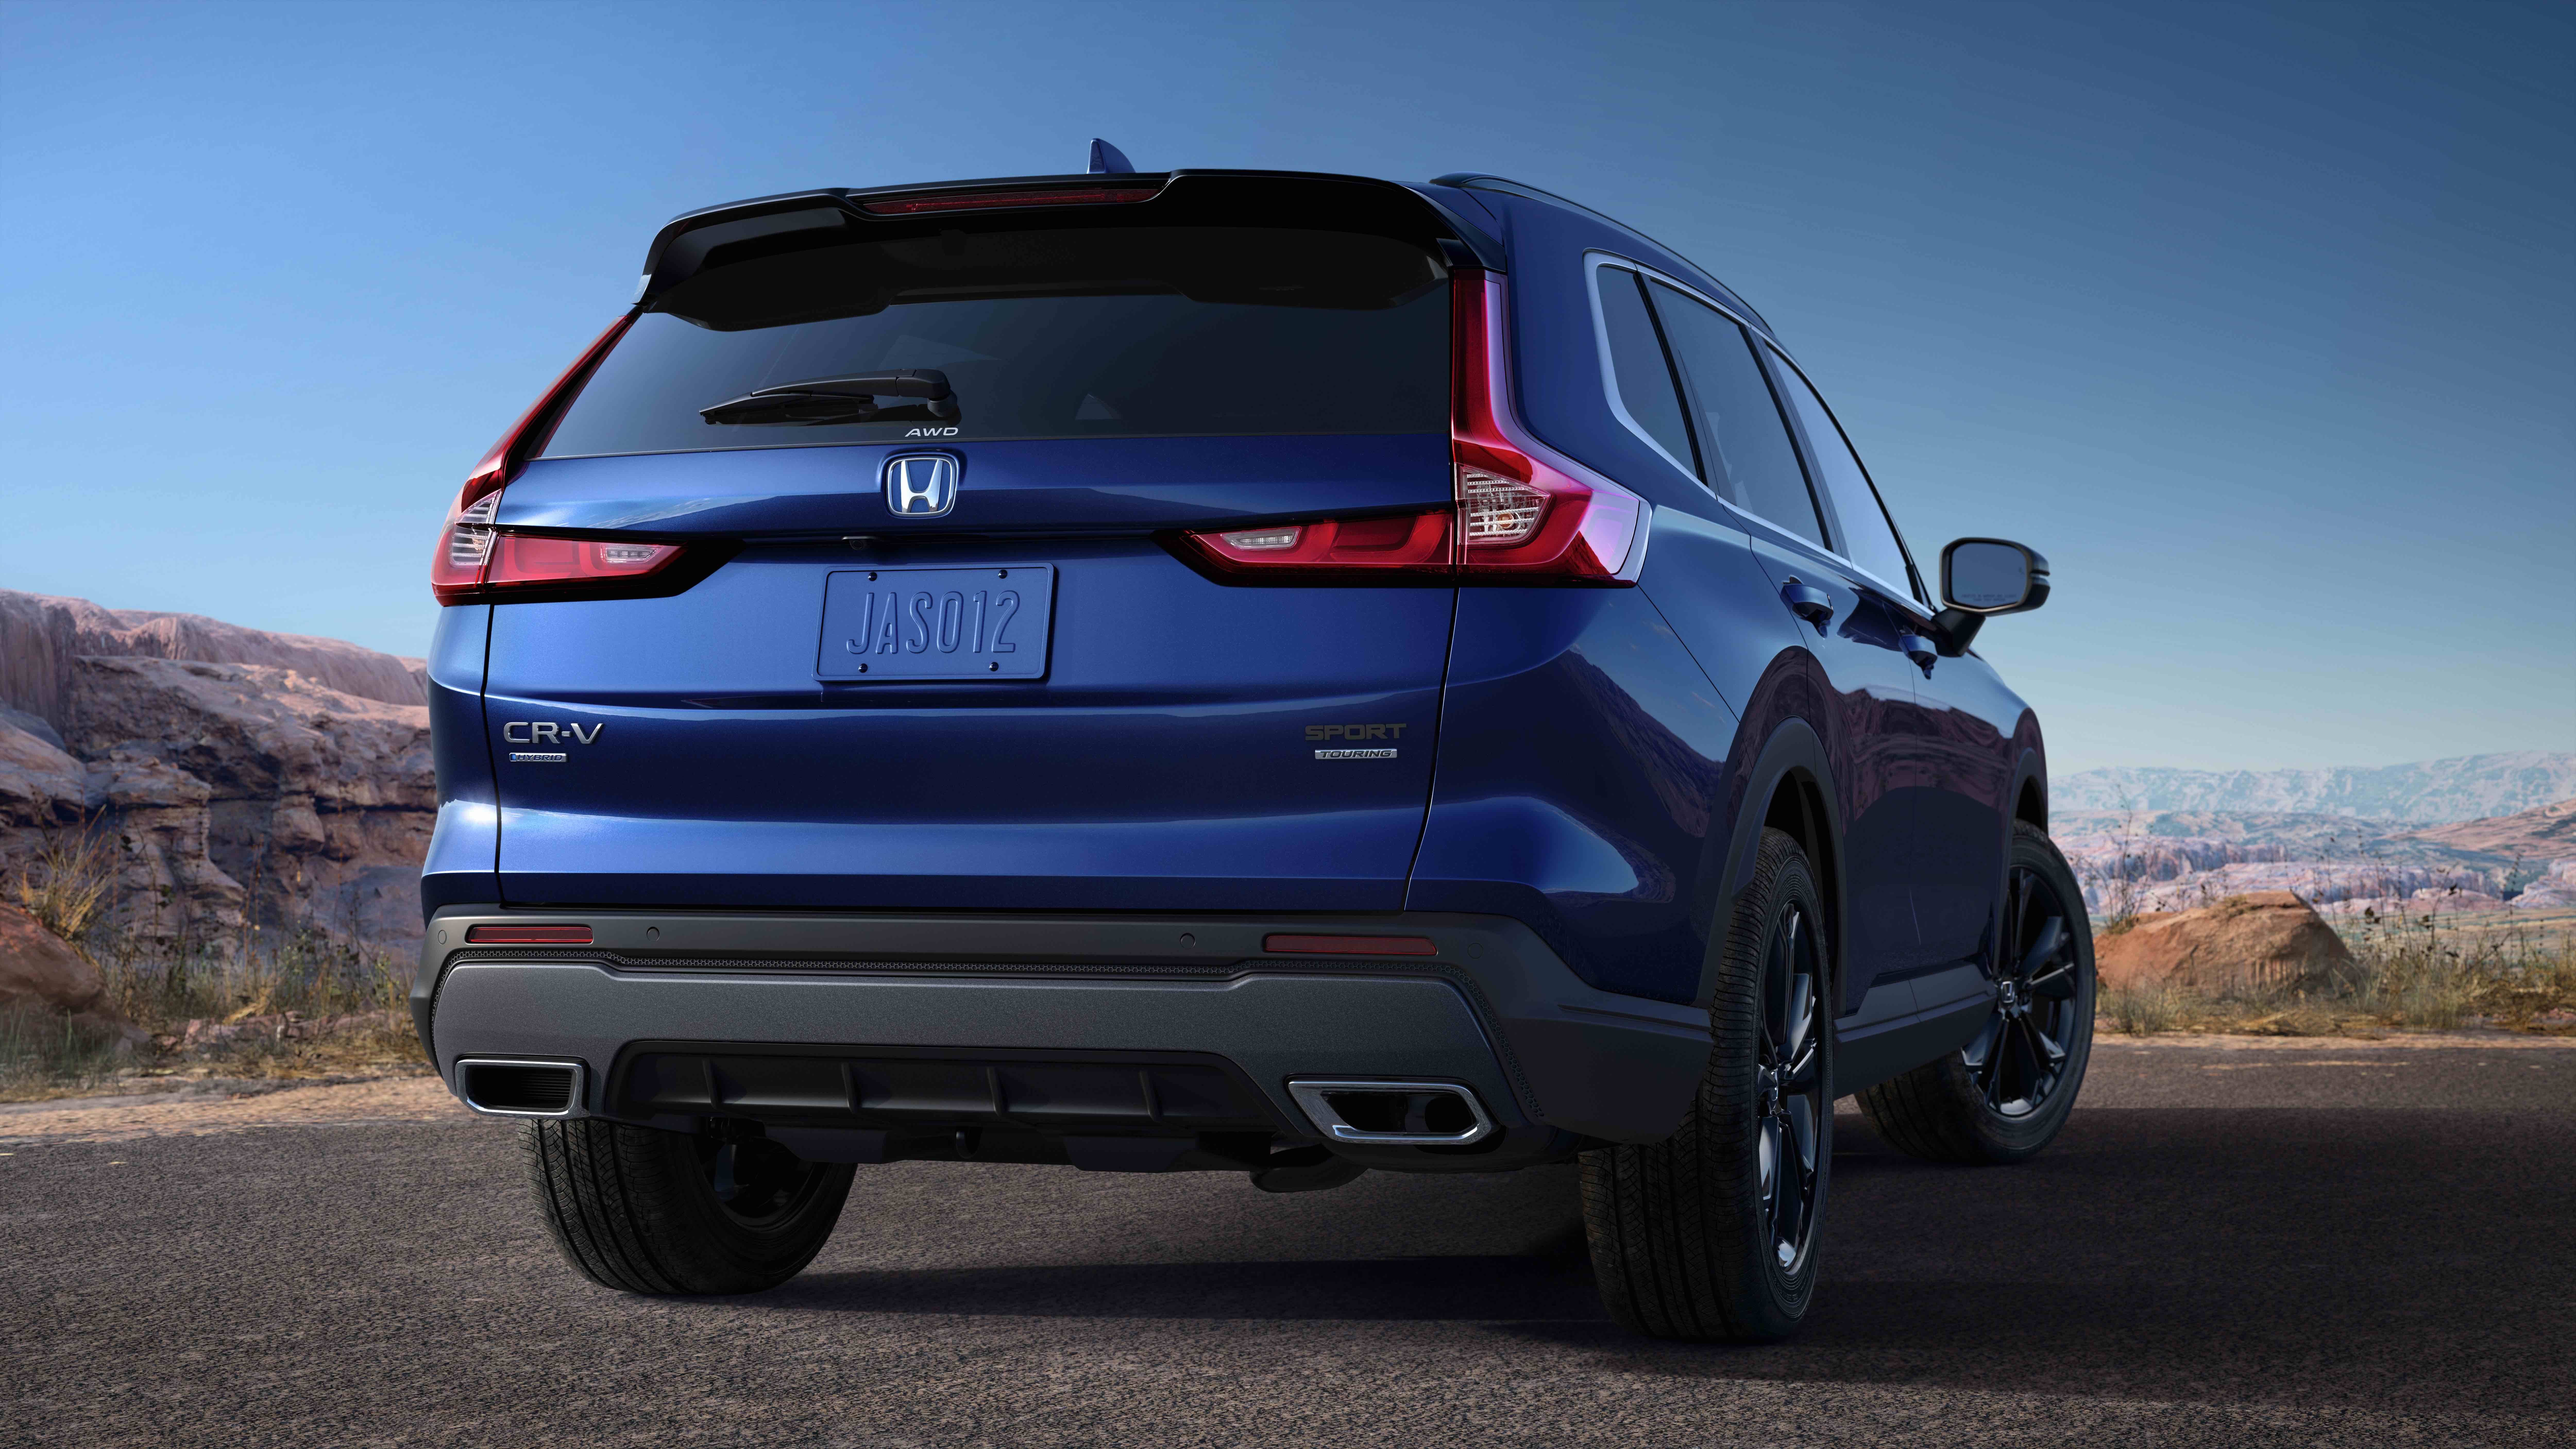 Next-generation Honda CR-V launched with new PHEV powertrain